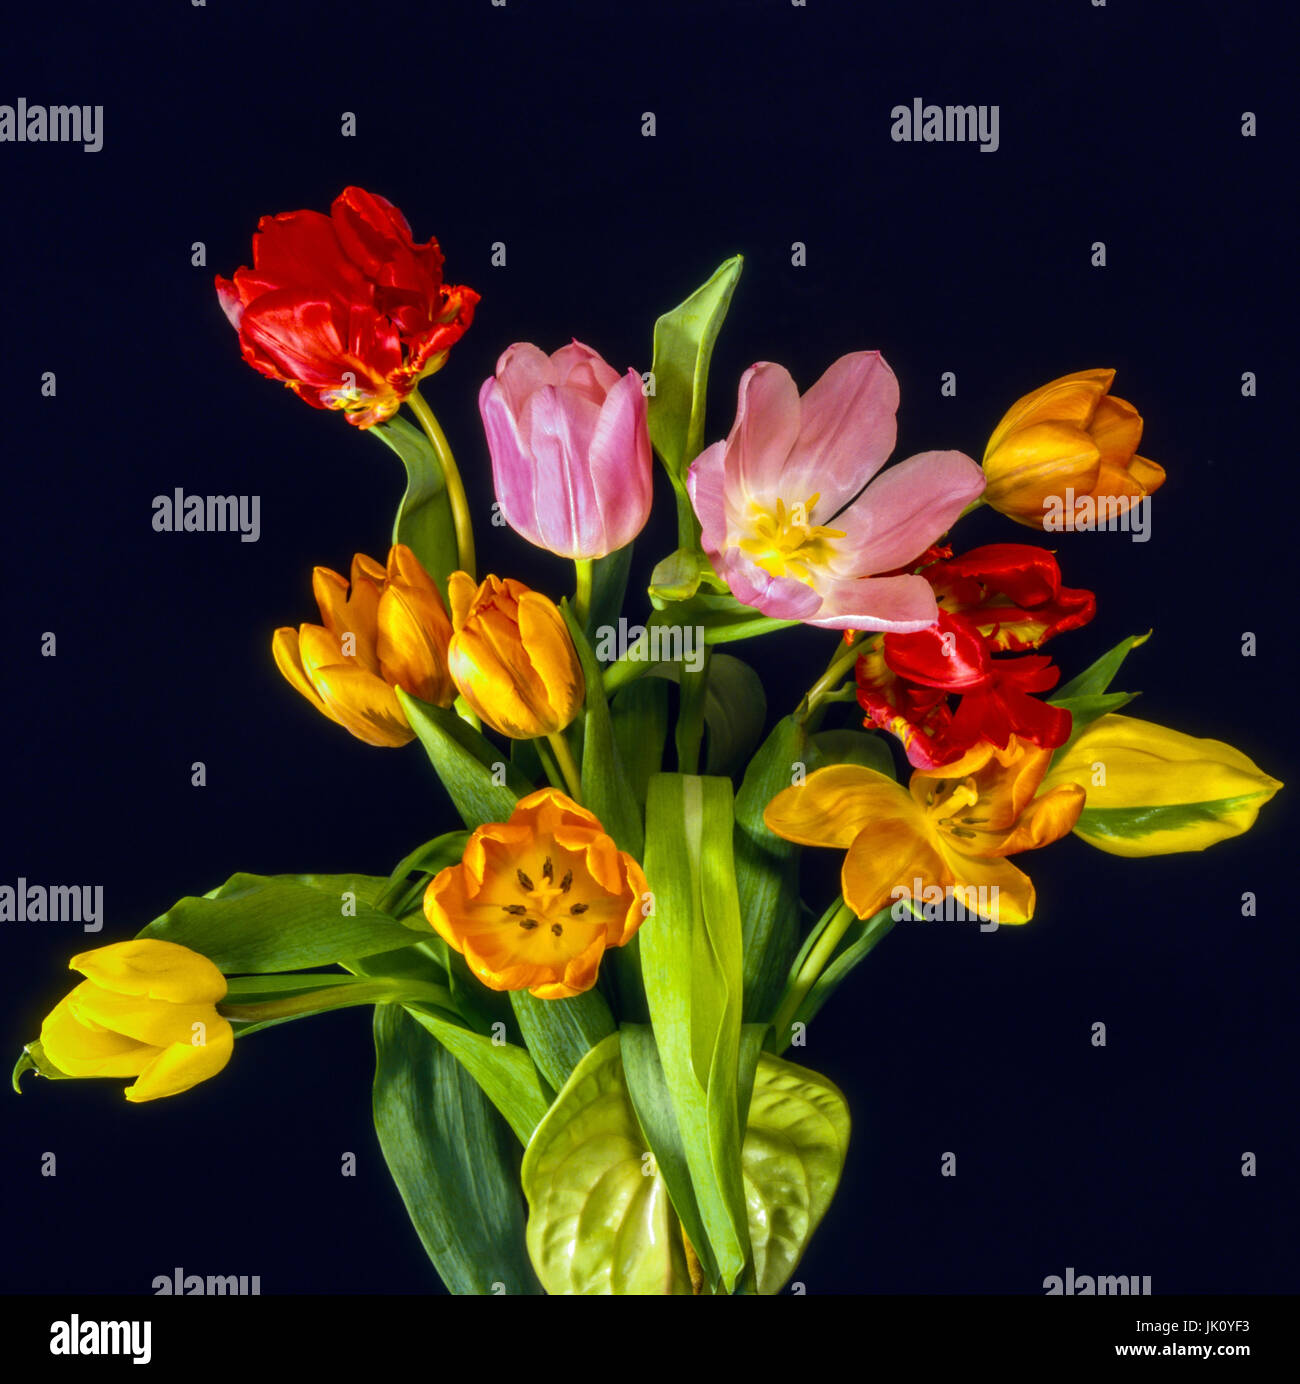 'mixed-coloured tulip bunch with tulip sheets and anthurie; dark background. mixed coloured bouquet of tulips and anthurium; dark baking drop.', gemis Stock Photo